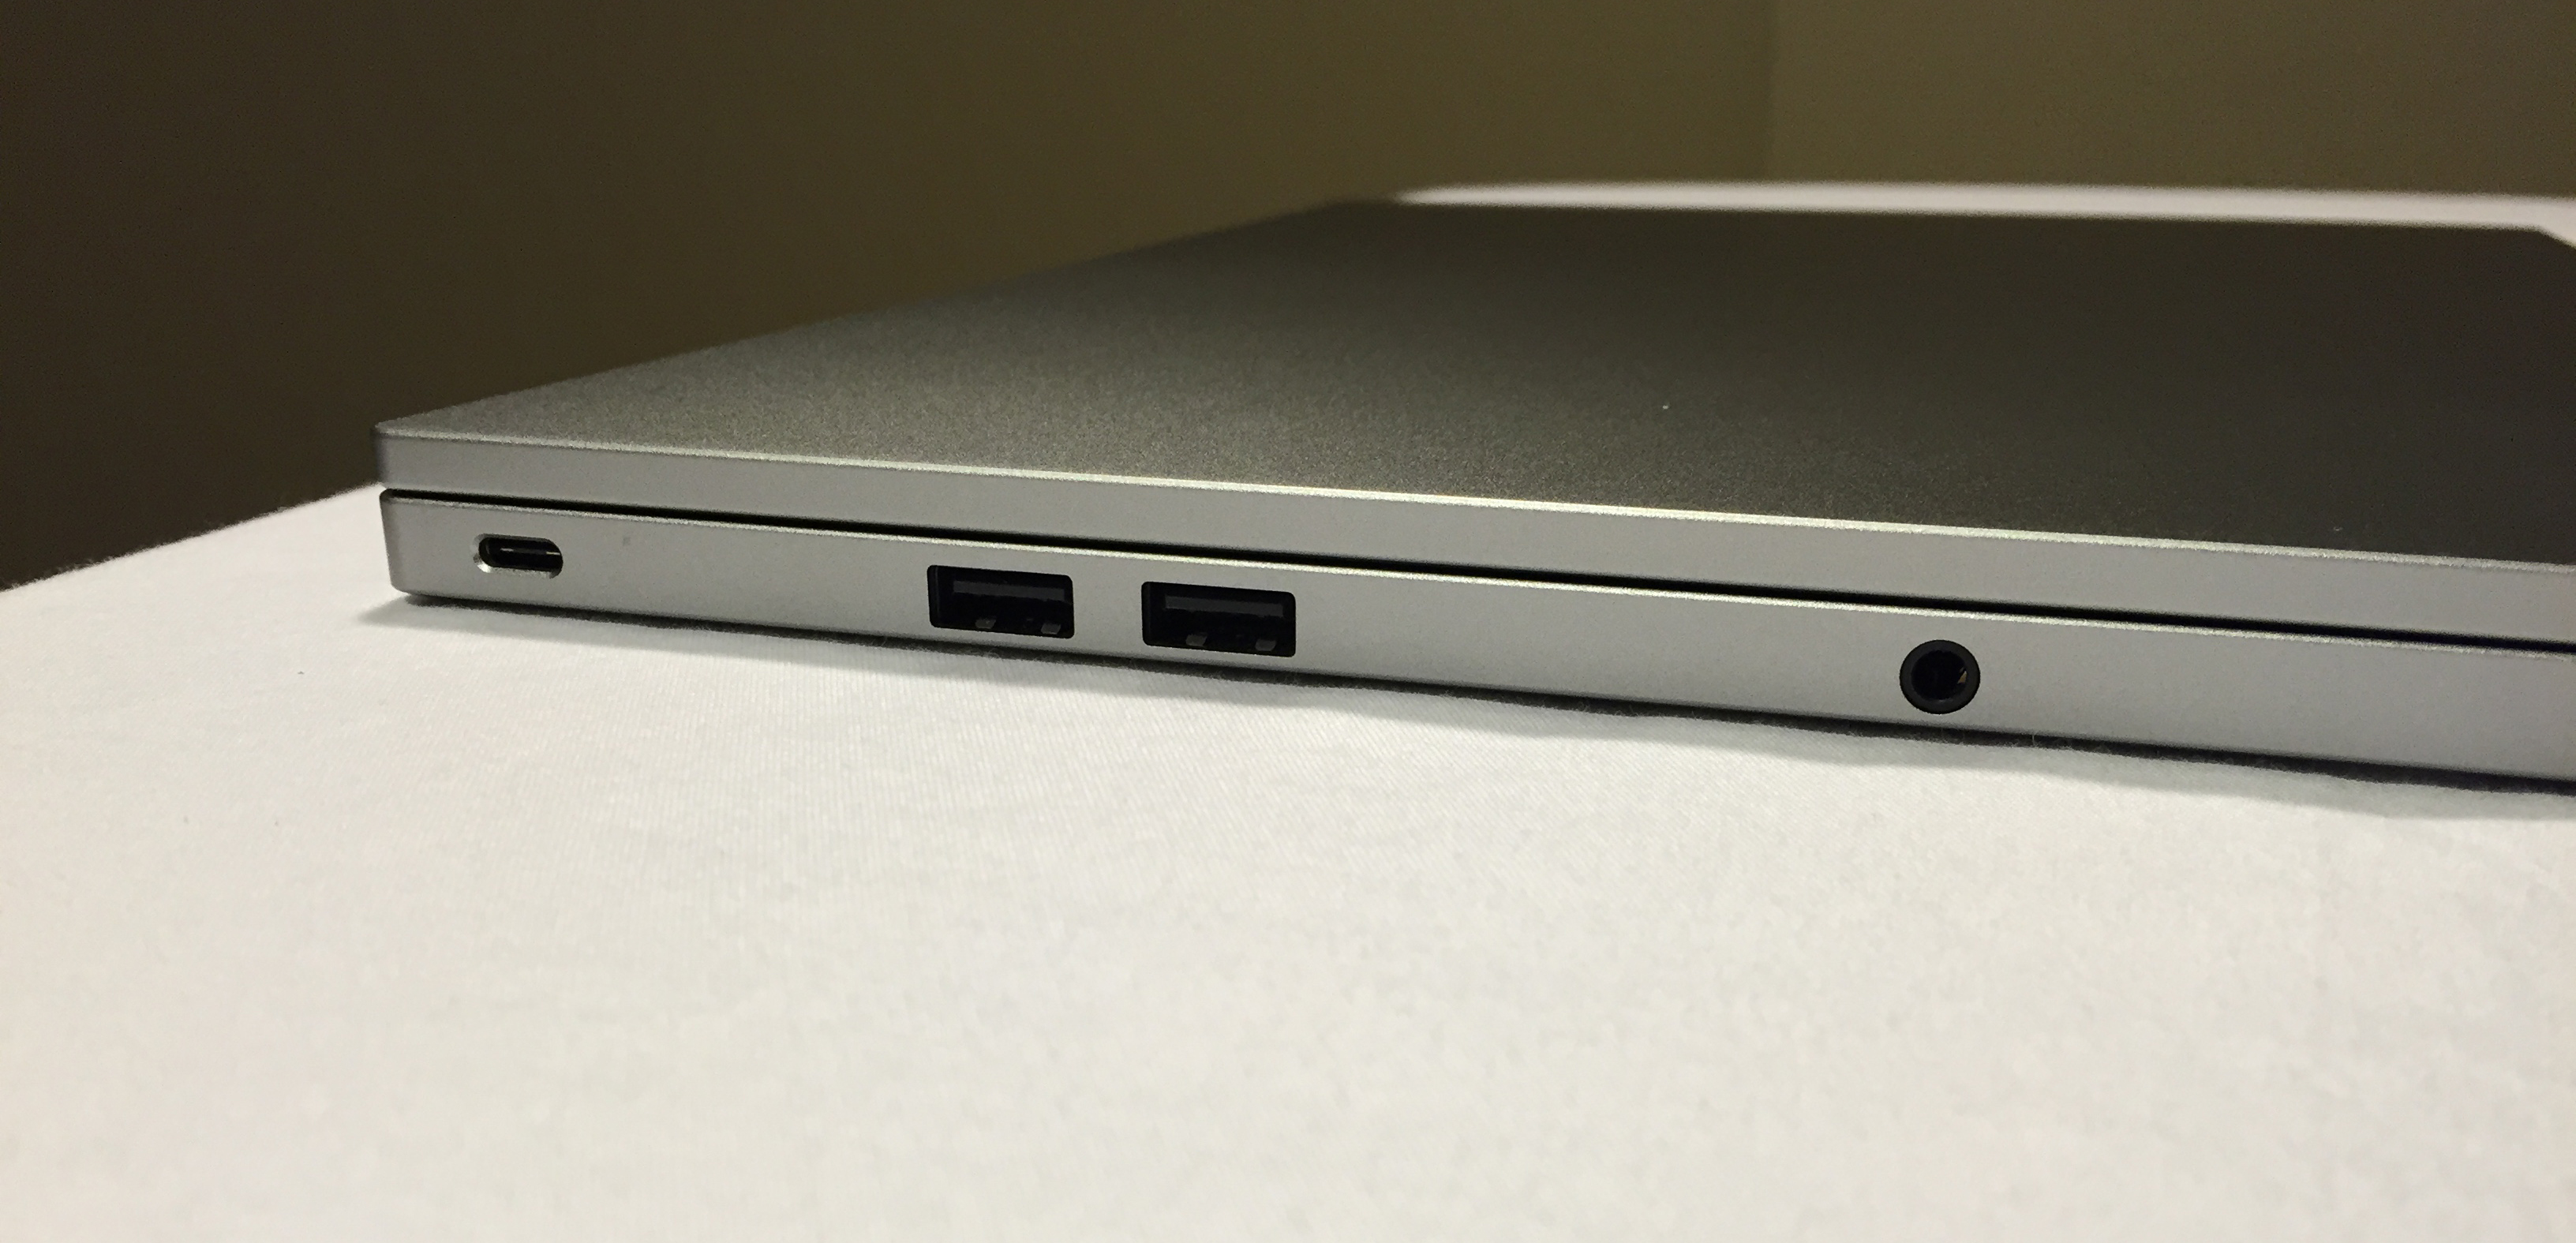 Chromebook Pixel LS is nearly perfect [Review]